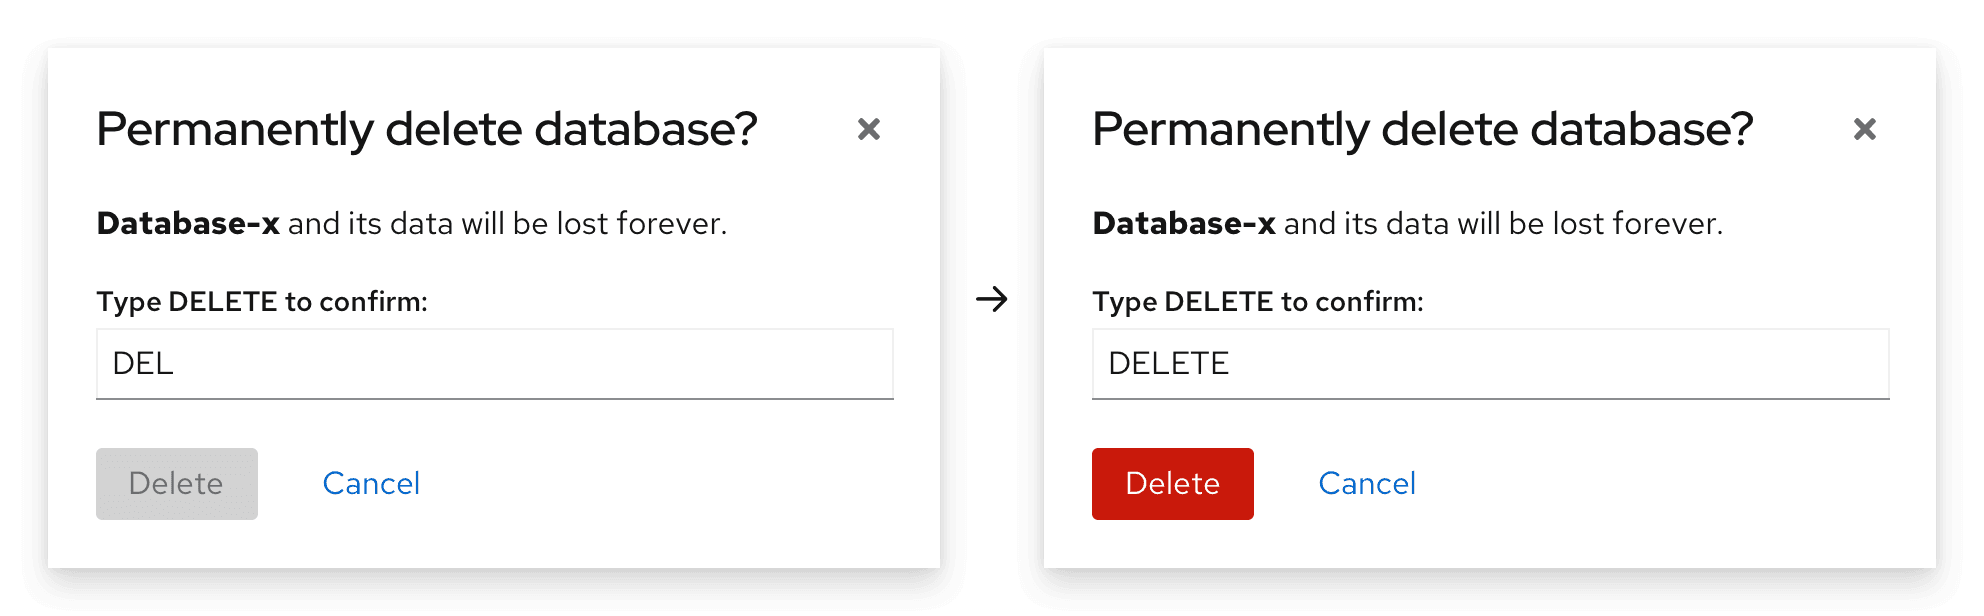 A multi-step destructive confirmation dialog's button activates only after a user types DELETE into the input field